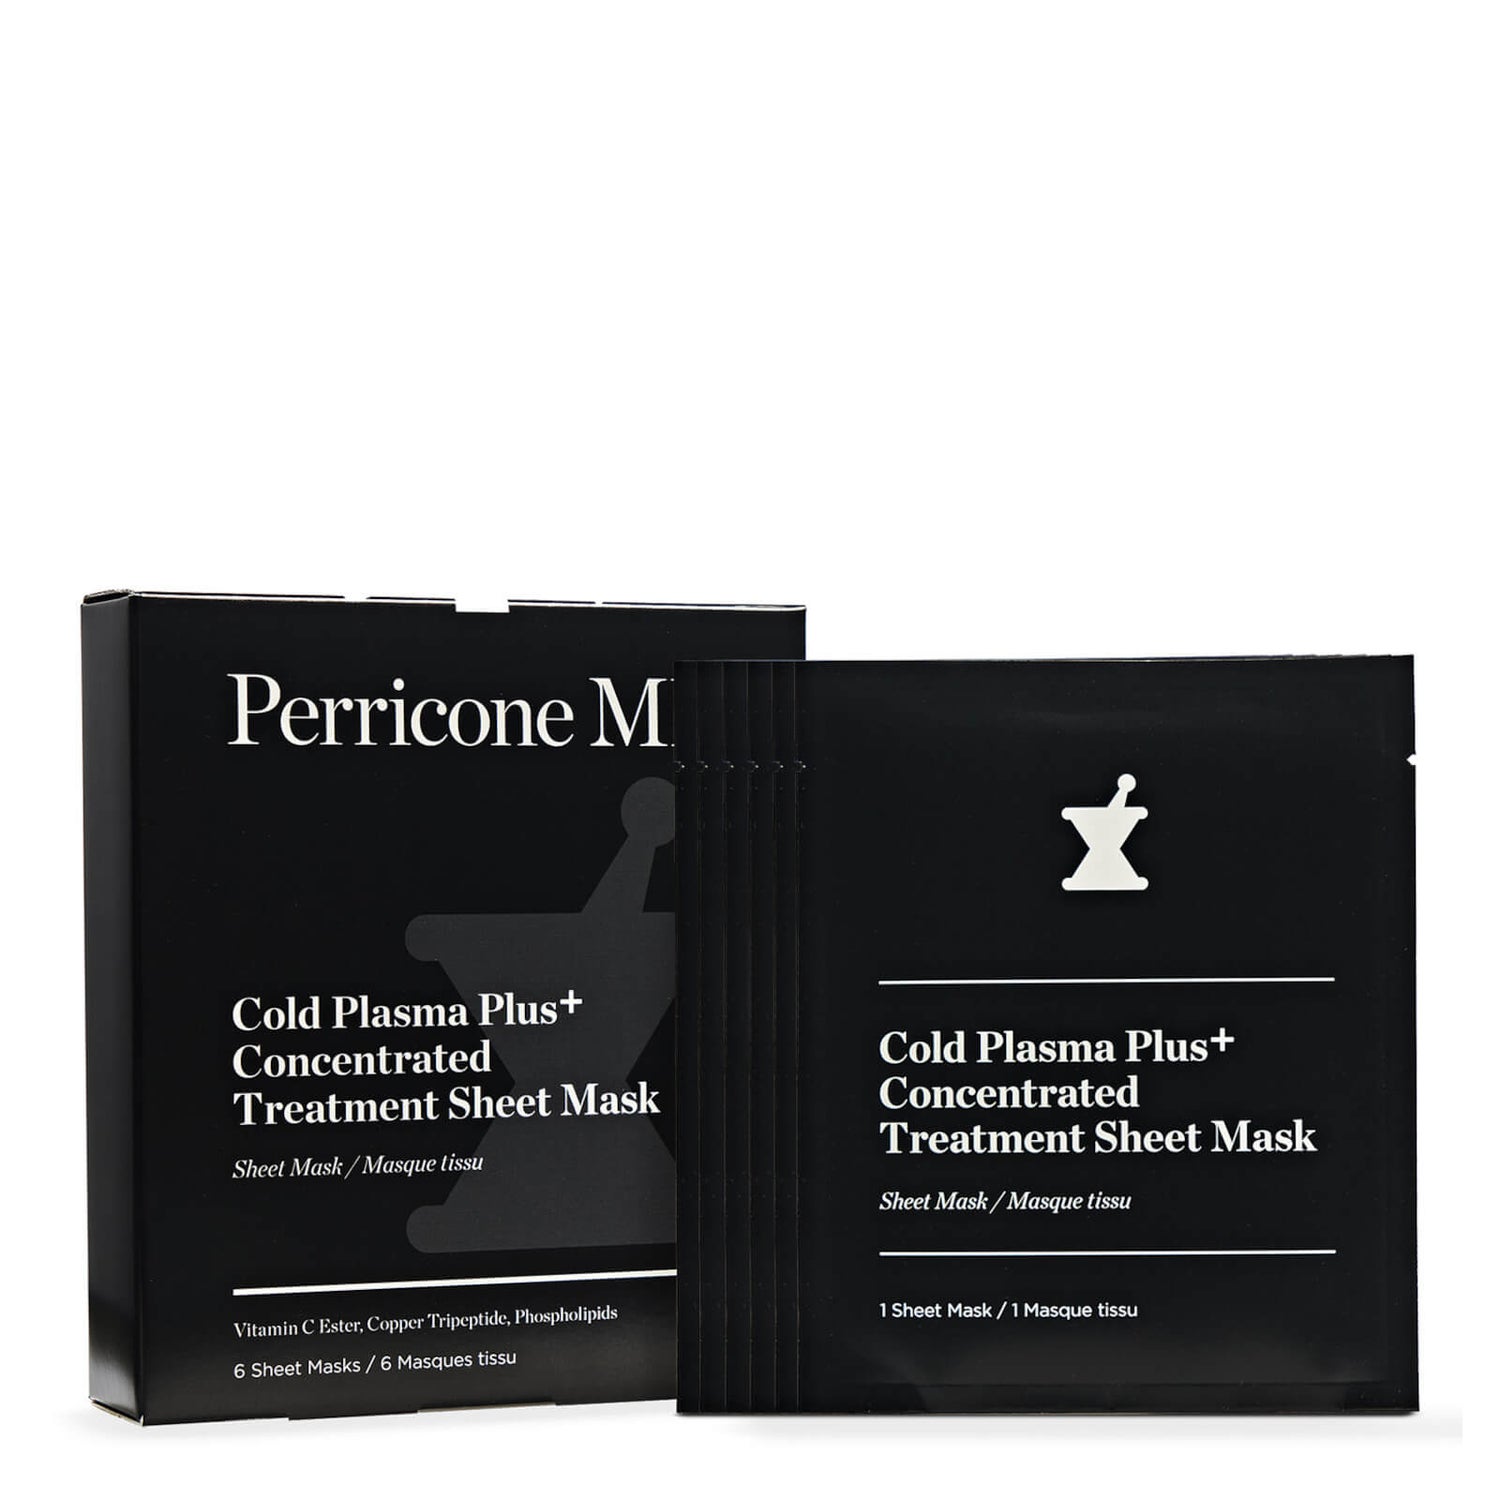 Perricone MD Cold Plasma Plus+ Concentrated Treatment Sheet Mask